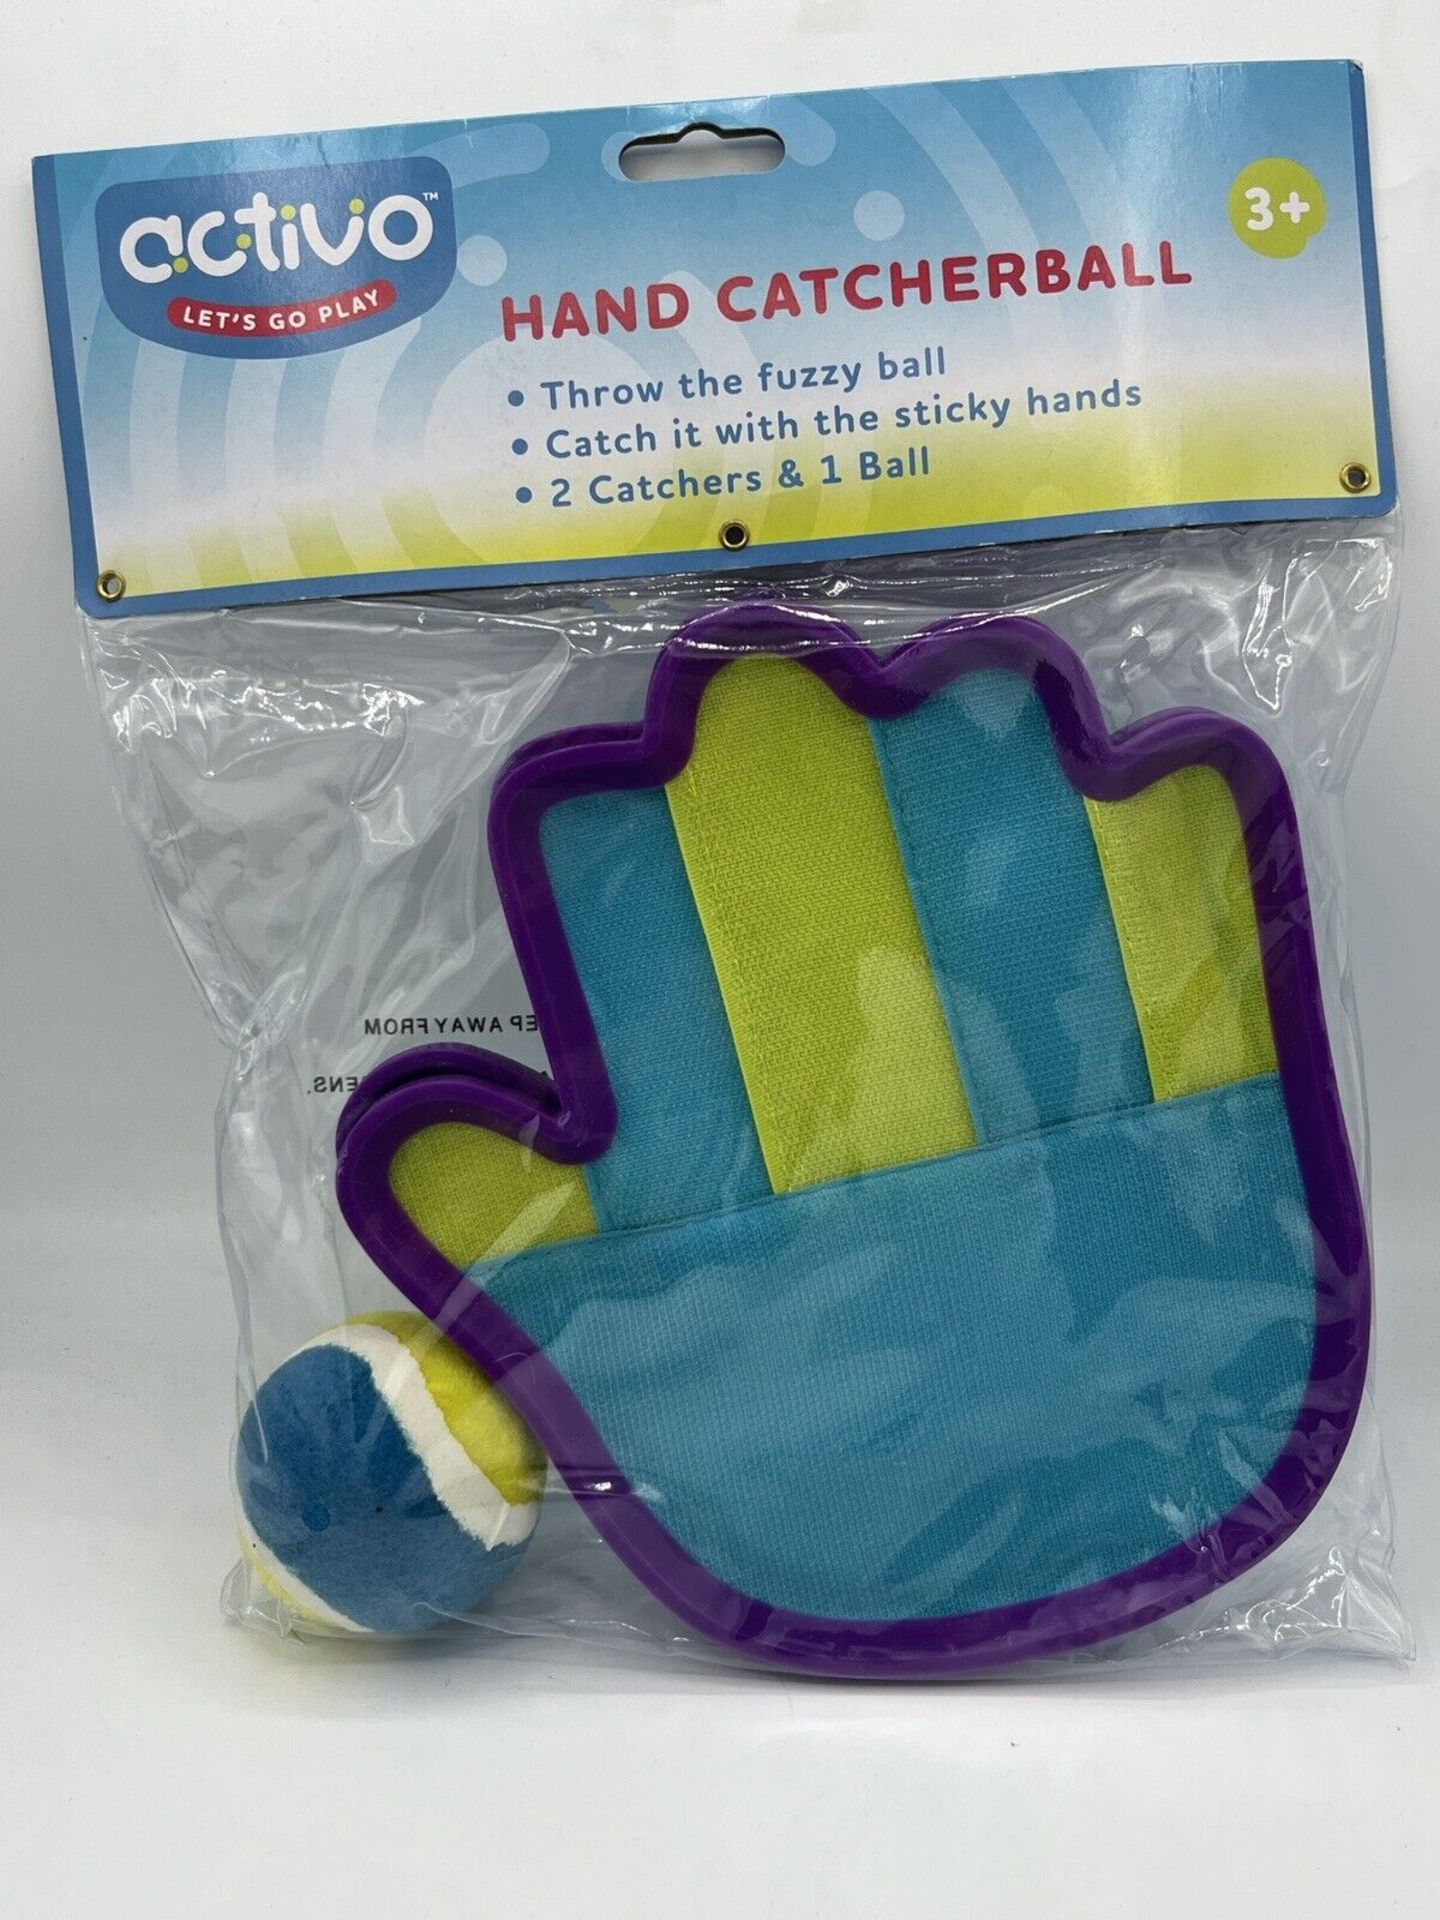 20 X BRAND NEW MOOKIE - HAND CATCHER BALL - INCLUDES 2 X CATCHERS AND 1 BALL - RRP £ 17.99 PP IN 1